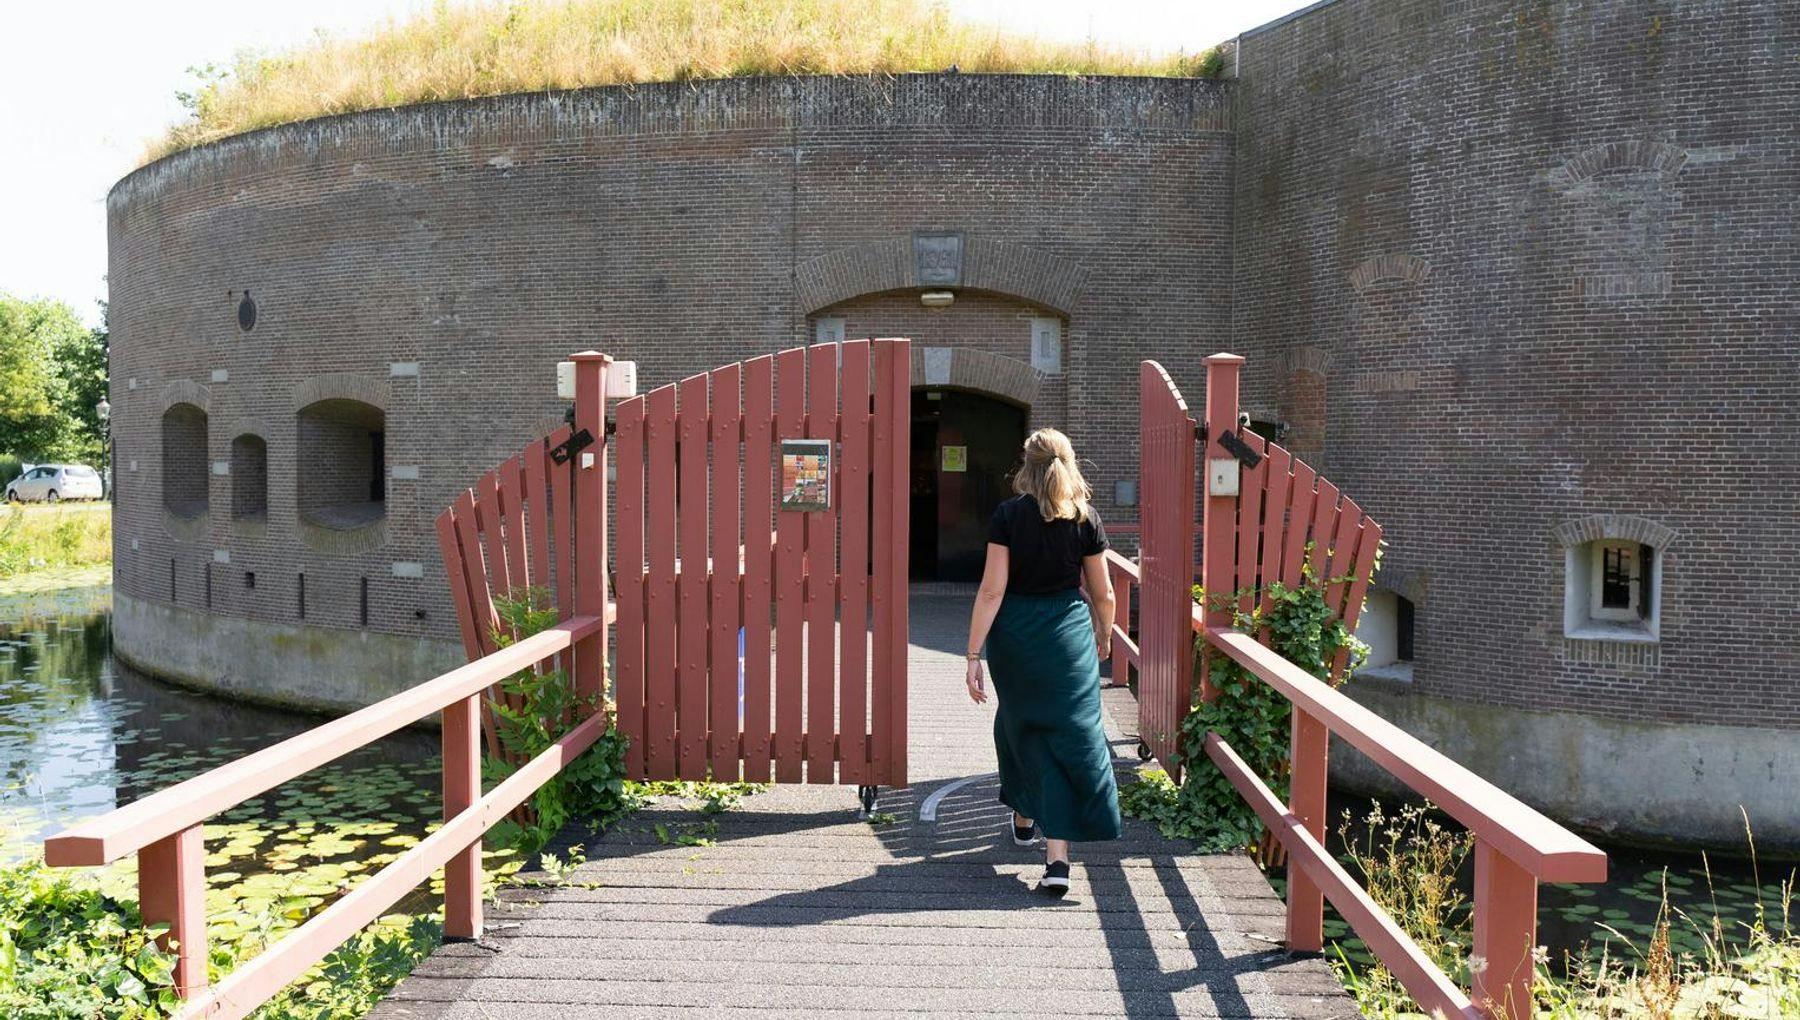 A woman going in to the Fortress Ossenmarkt in Weesp